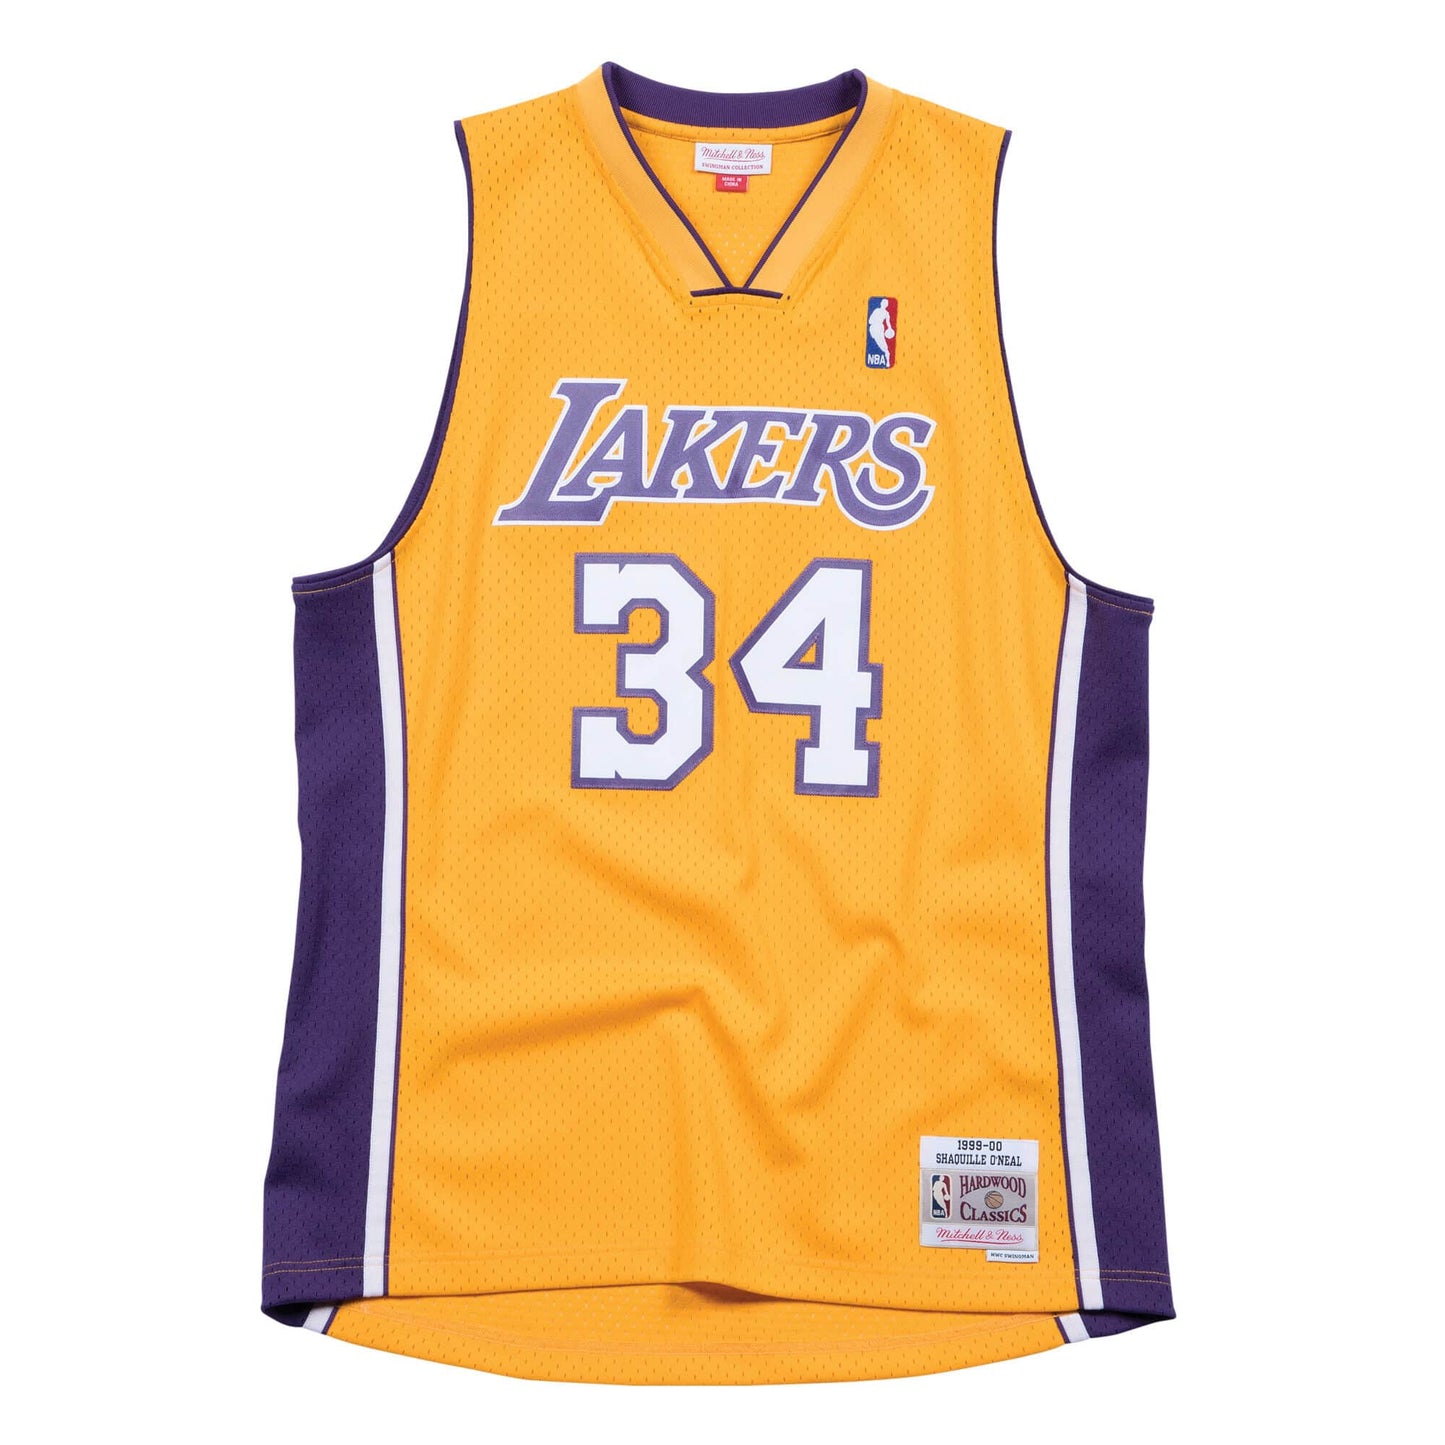 SHAQUILLE O'NEAL MEN'S LOS ANGELES LAKERS MITCHELL & NESS 99-00' SWINGMAN JERSEY